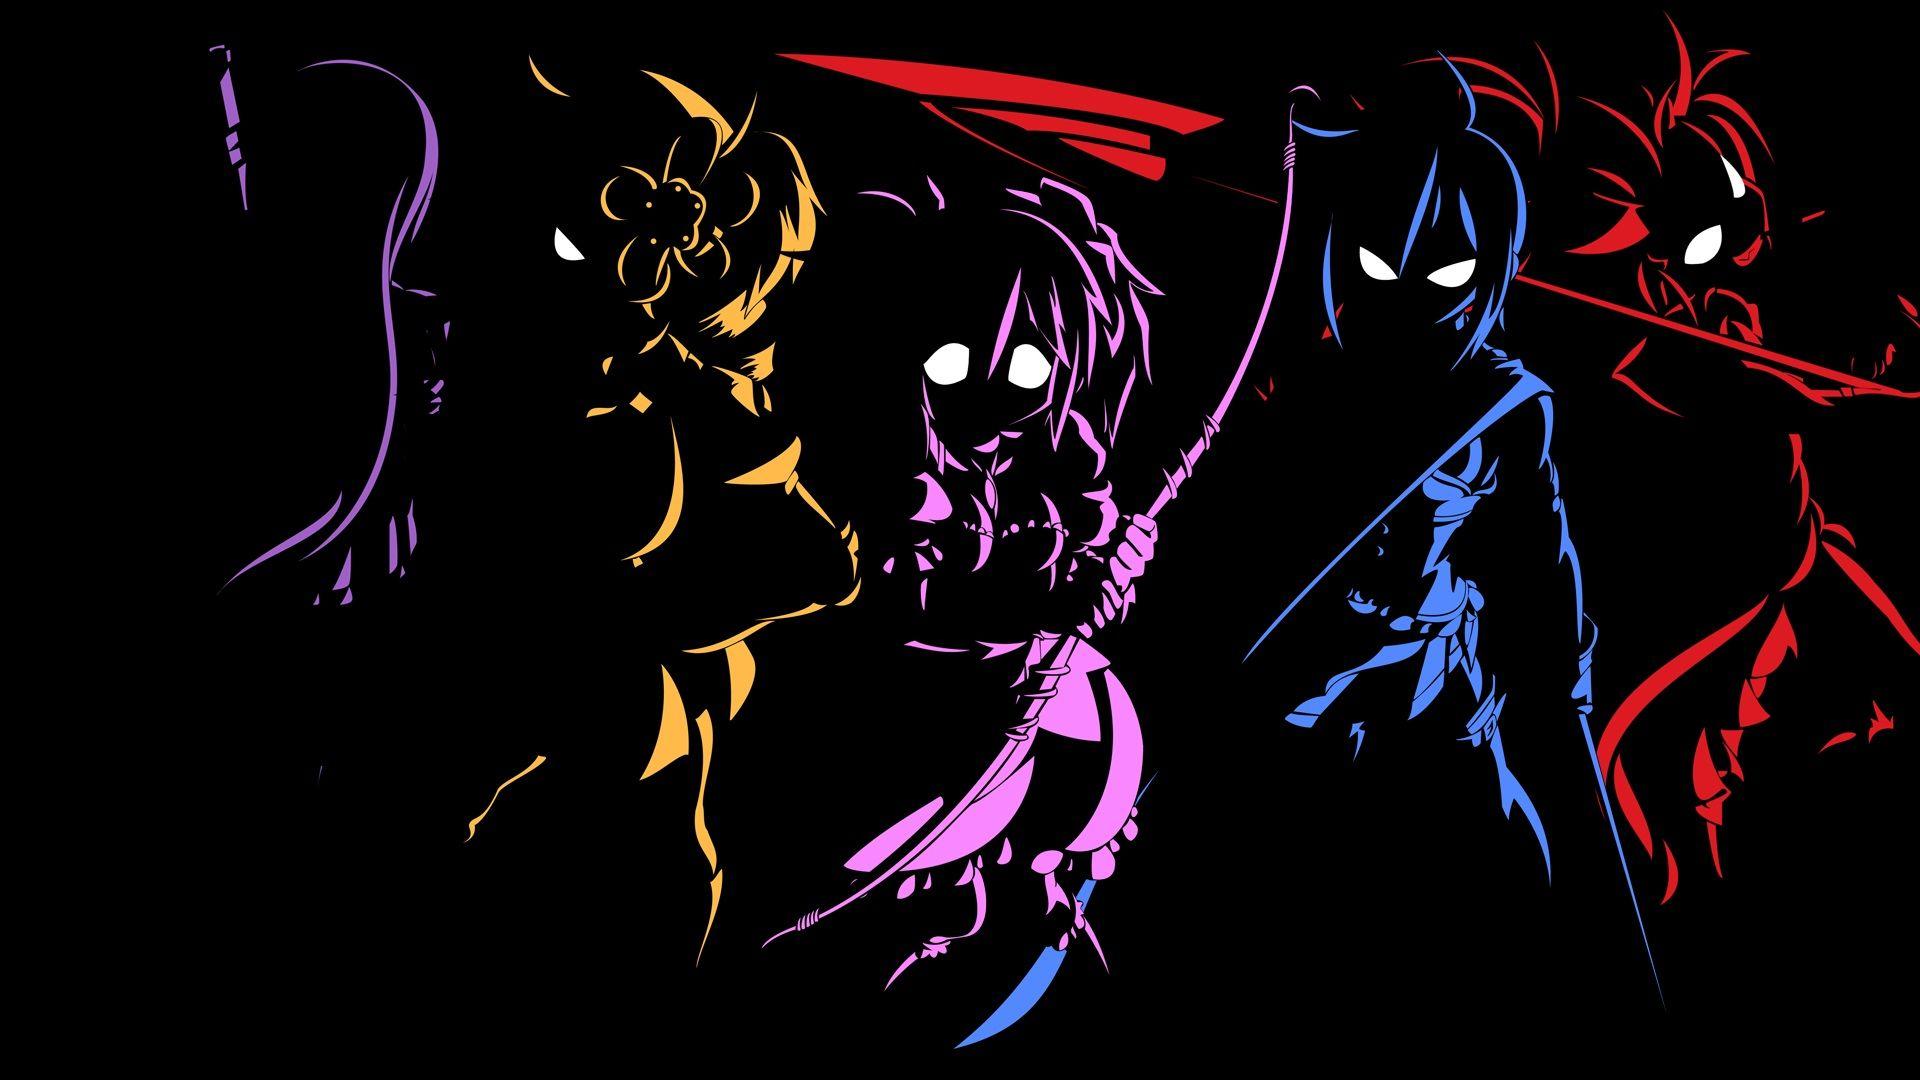 Anime Characters Outline Black Wallpaper. Cool anime wallpaper, Anime wallpaper download, Dark anime